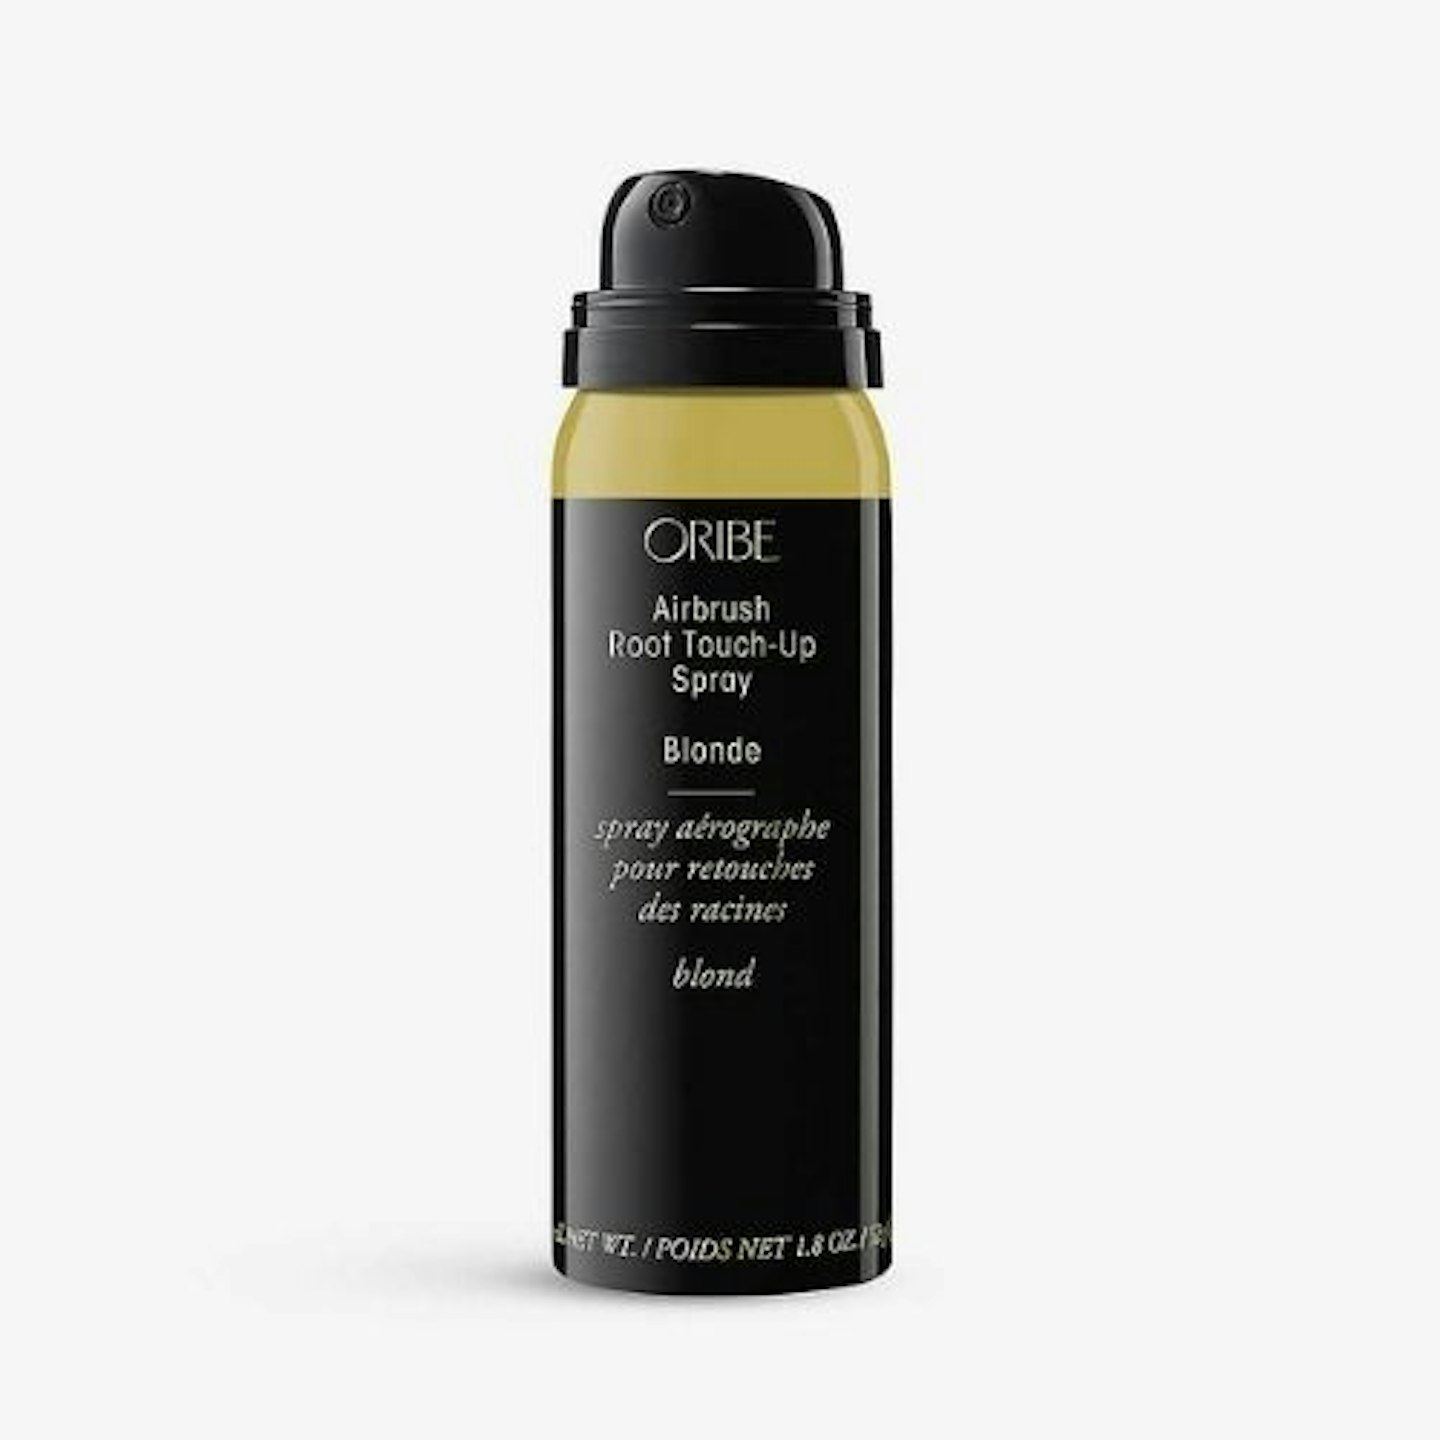 Oribe Blonde Airbrush Root Touch-Up Spray 75ml